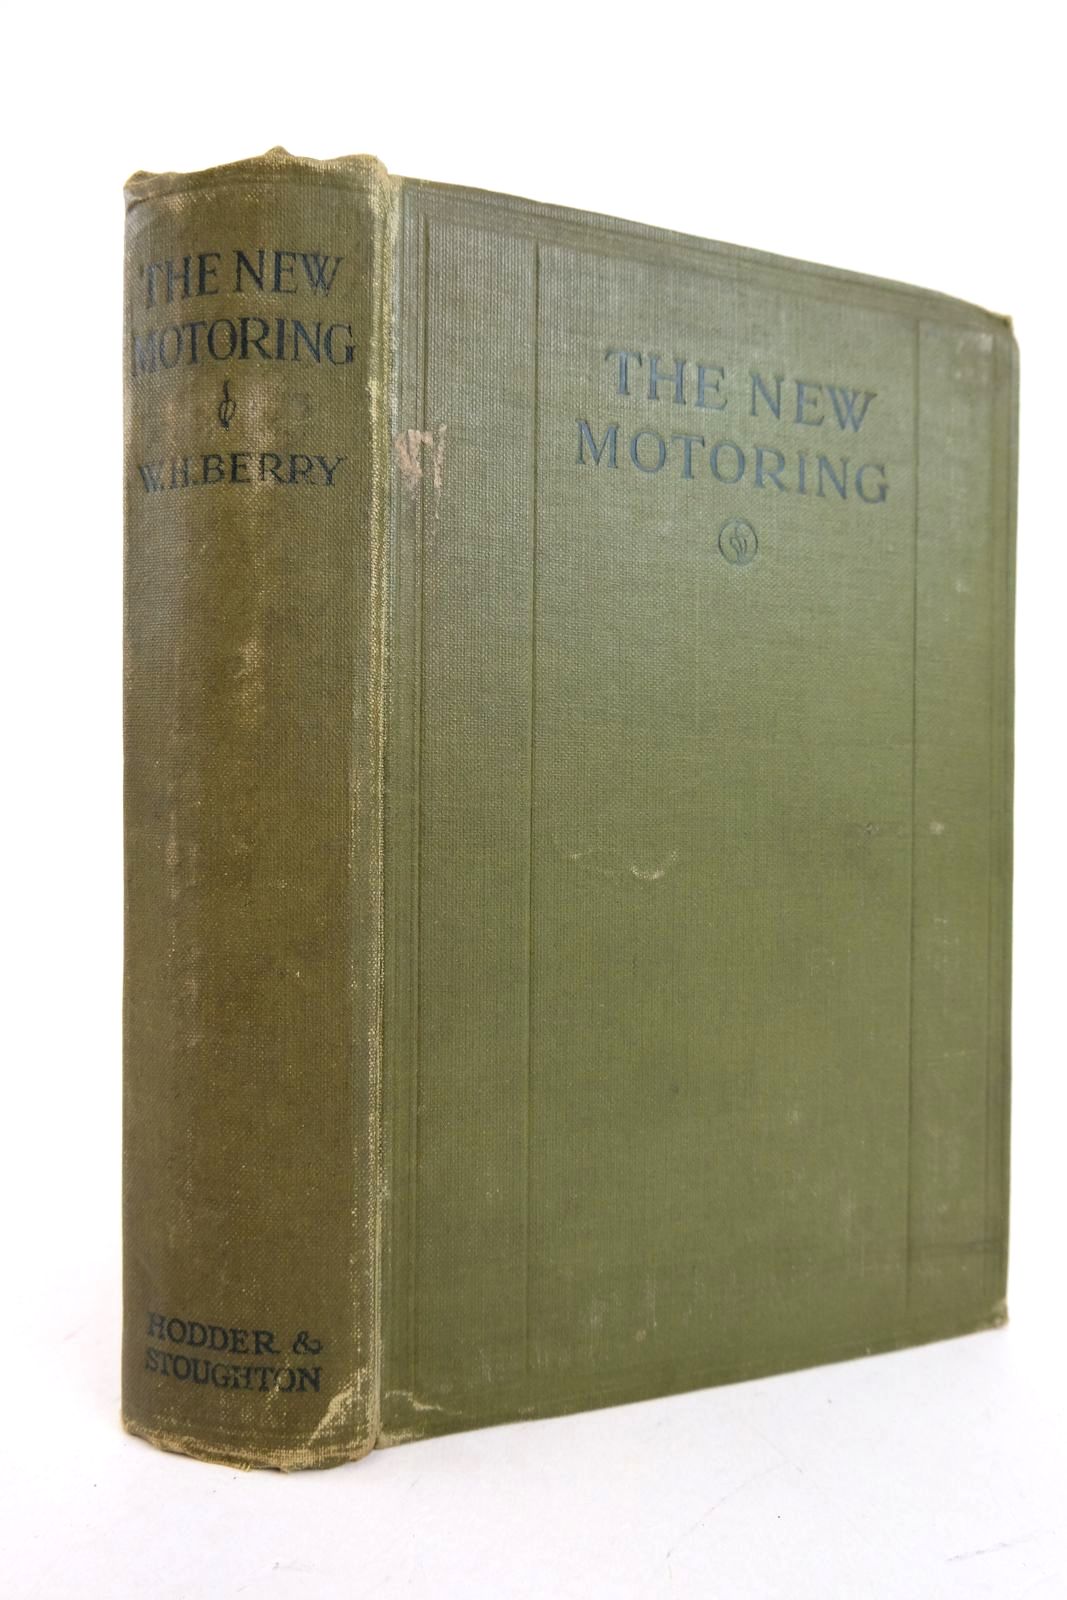 Photo of THE NEW MOTORING written by Berry, W.H. published by Hodder & Stoughton (STOCK CODE: 2133270)  for sale by Stella & Rose's Books